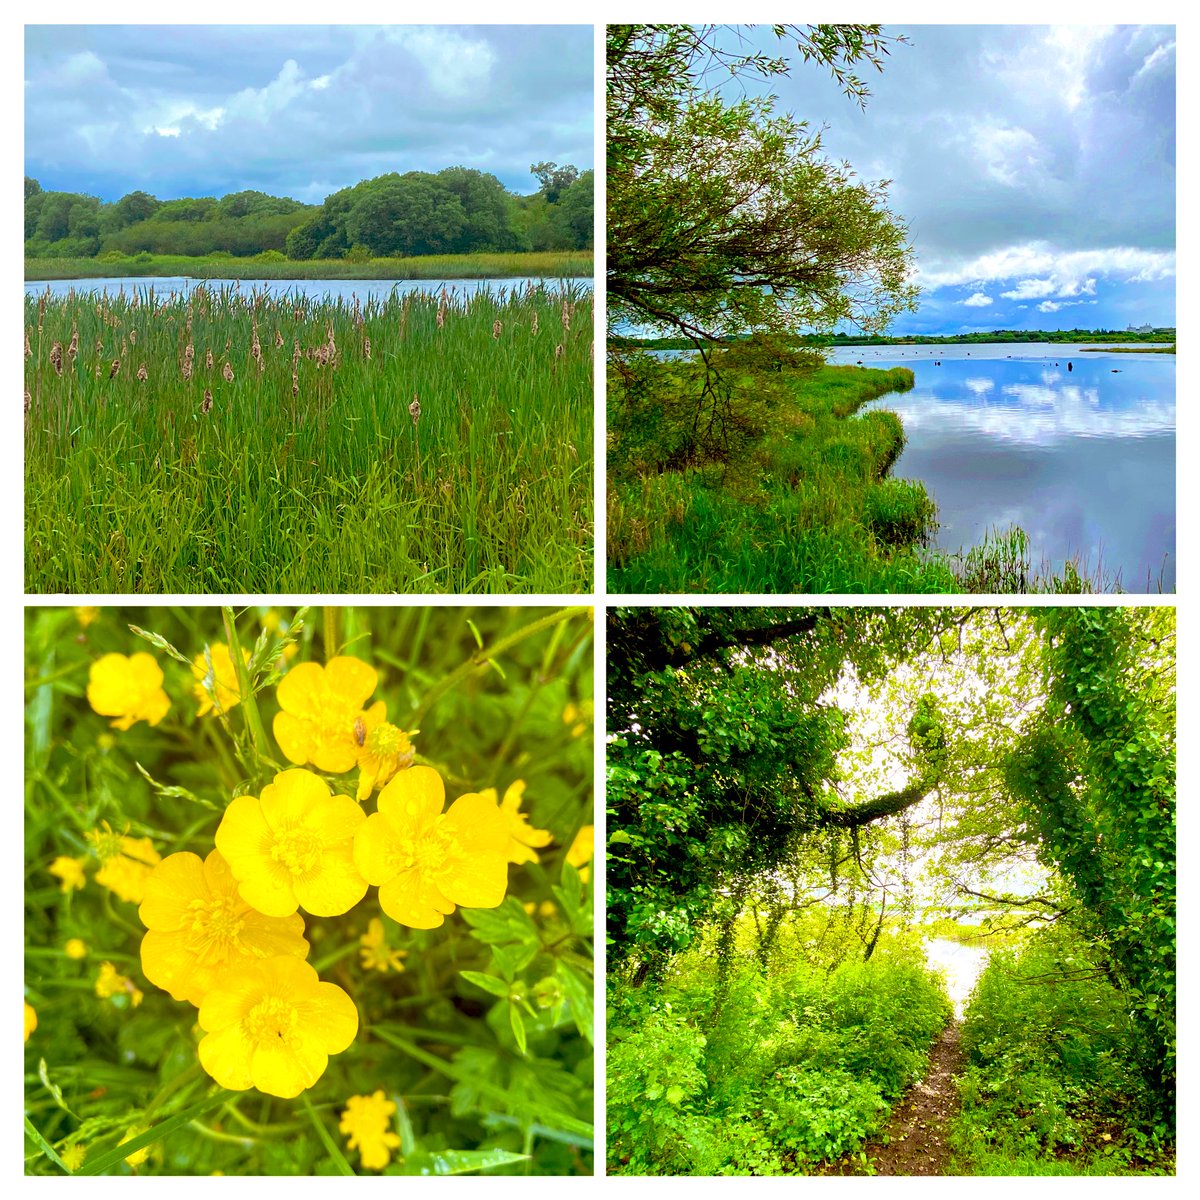 A lovely Sunday walk at The Gearagh earlier before the rain came! 💚 #NatureReserve #NatureBeauty #ThePhotoHour #PureCork #Cork